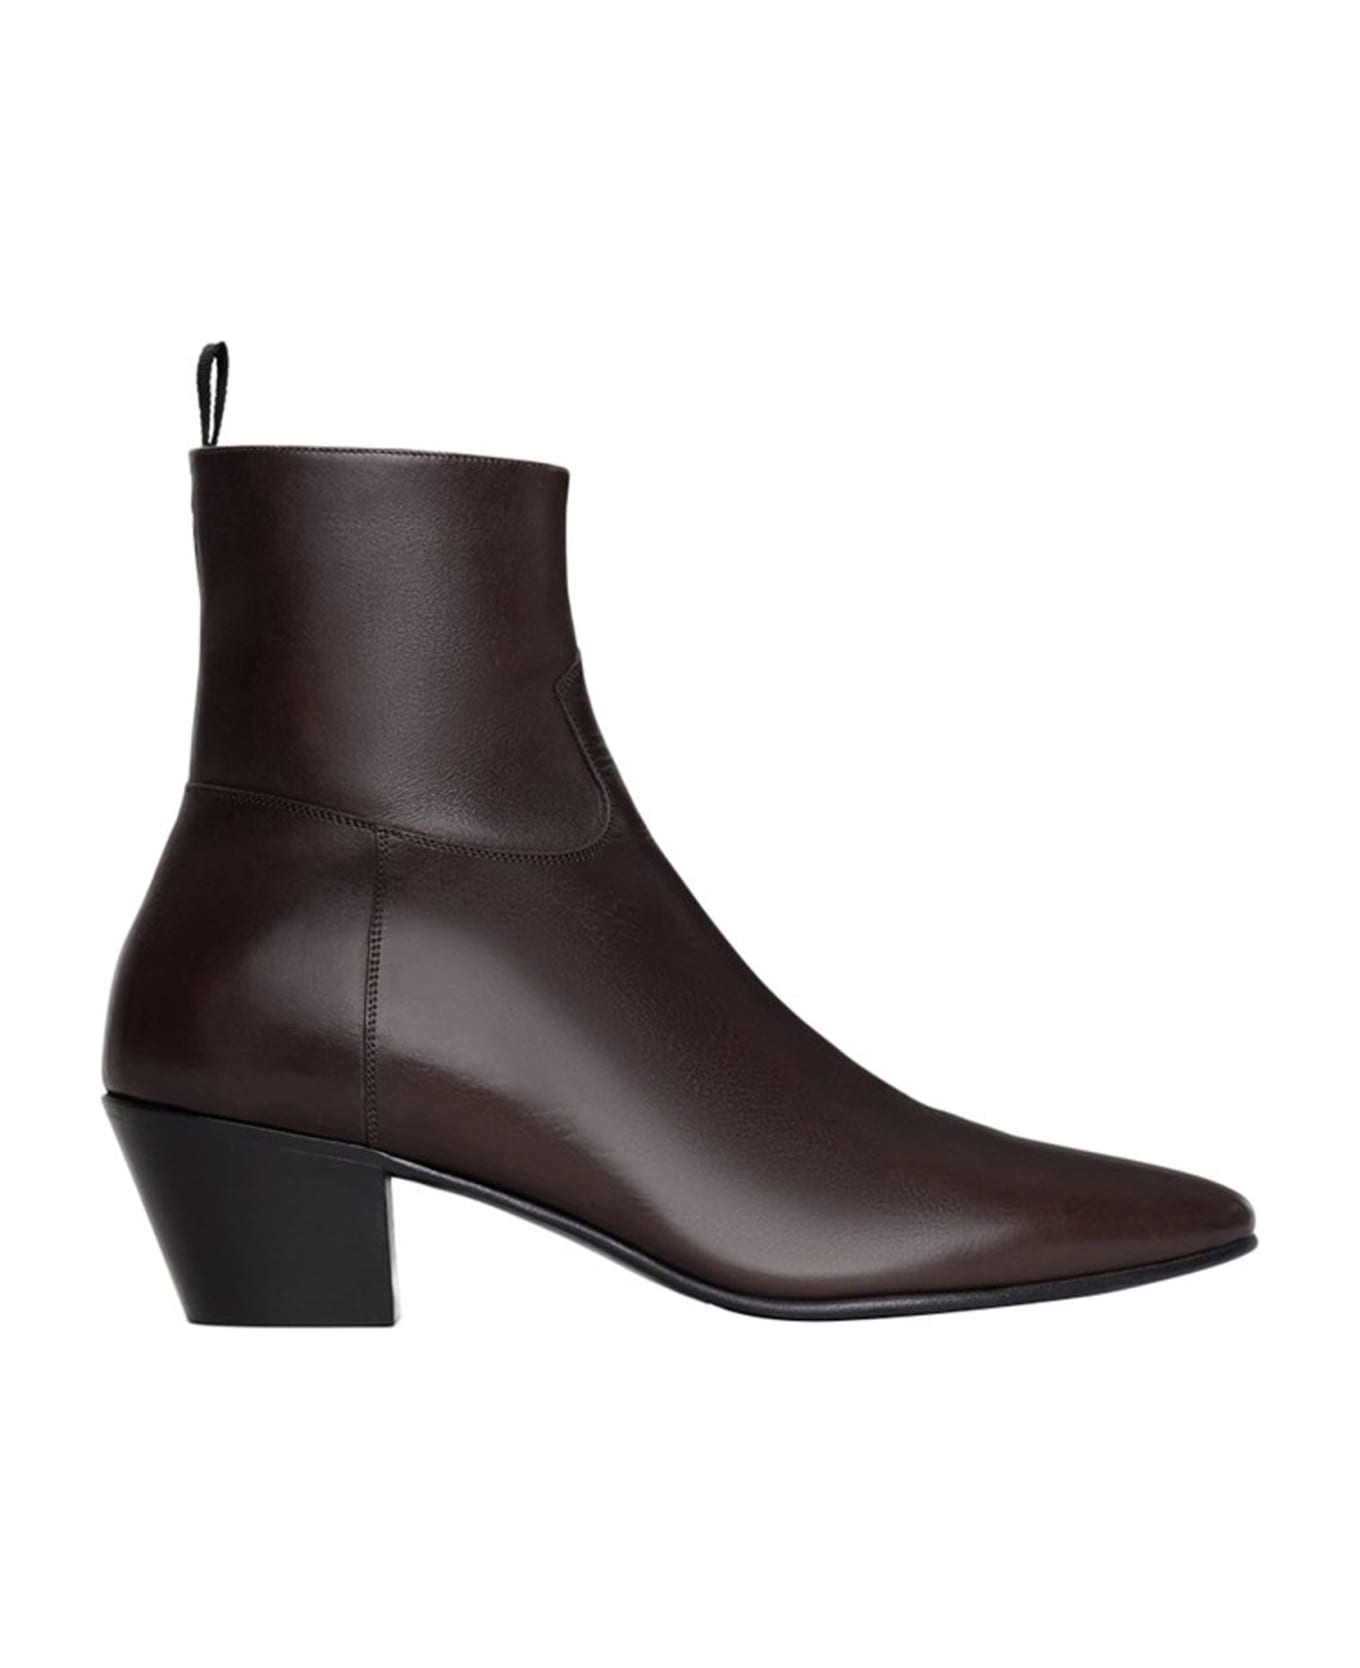 Celine Leather Boots - Brown ブーツ